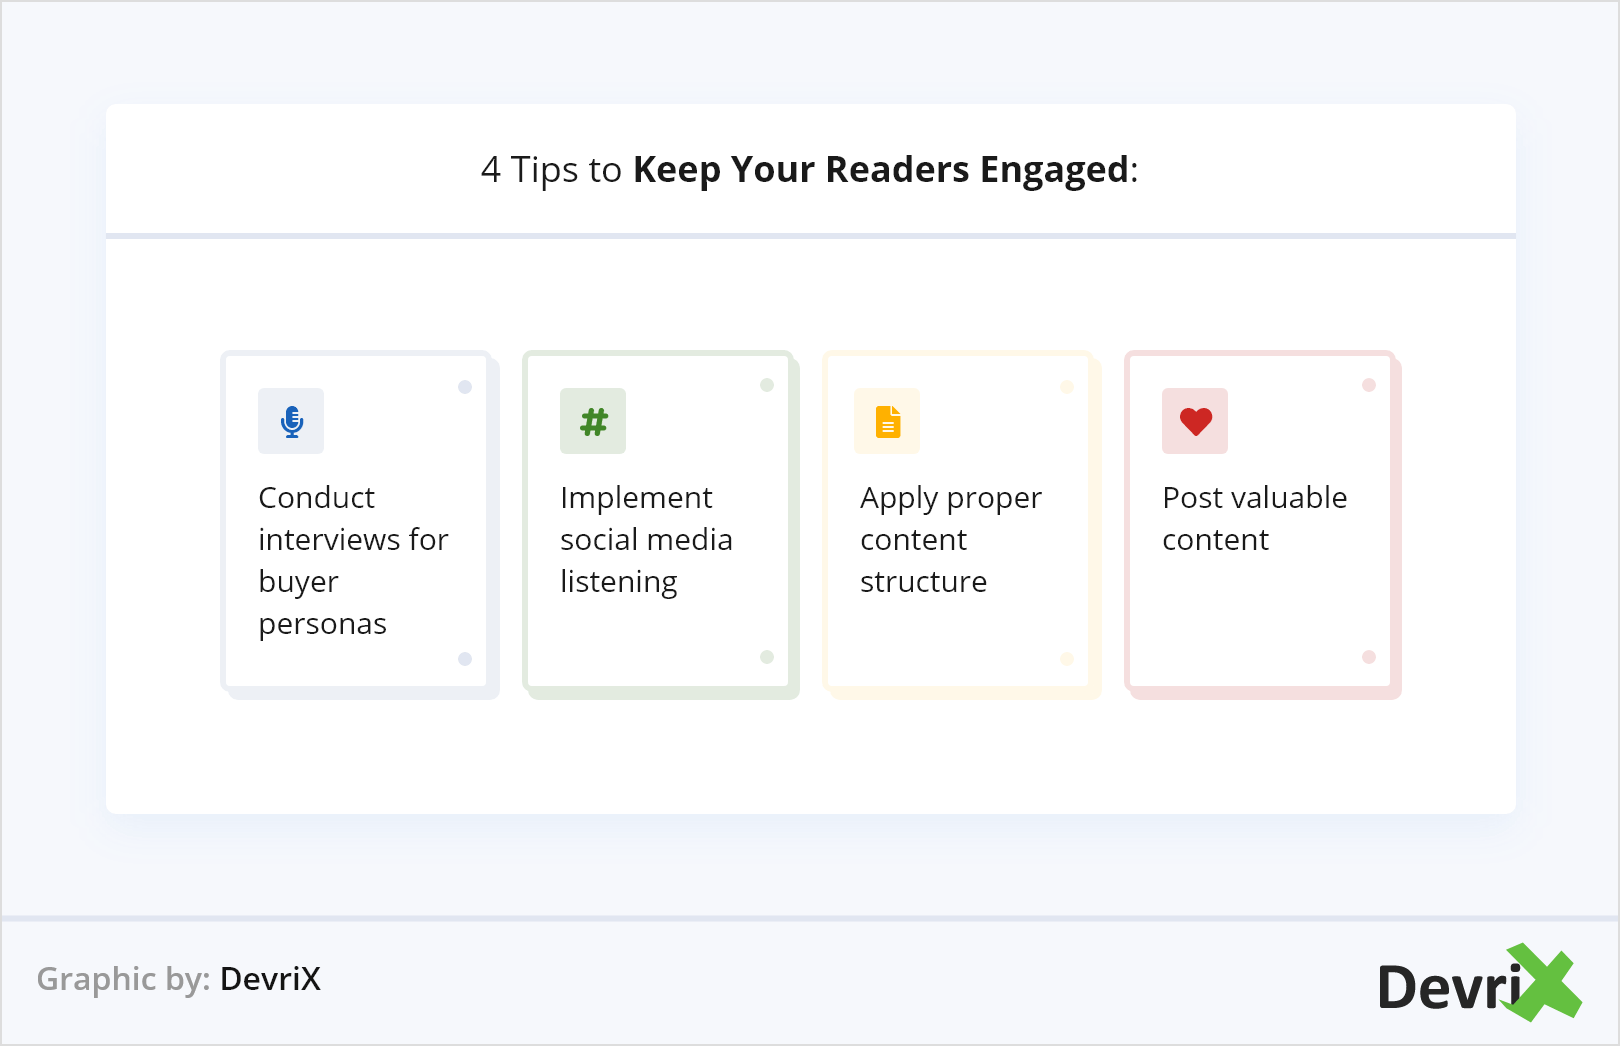 4 Tips to Keep Your Readers Engaged